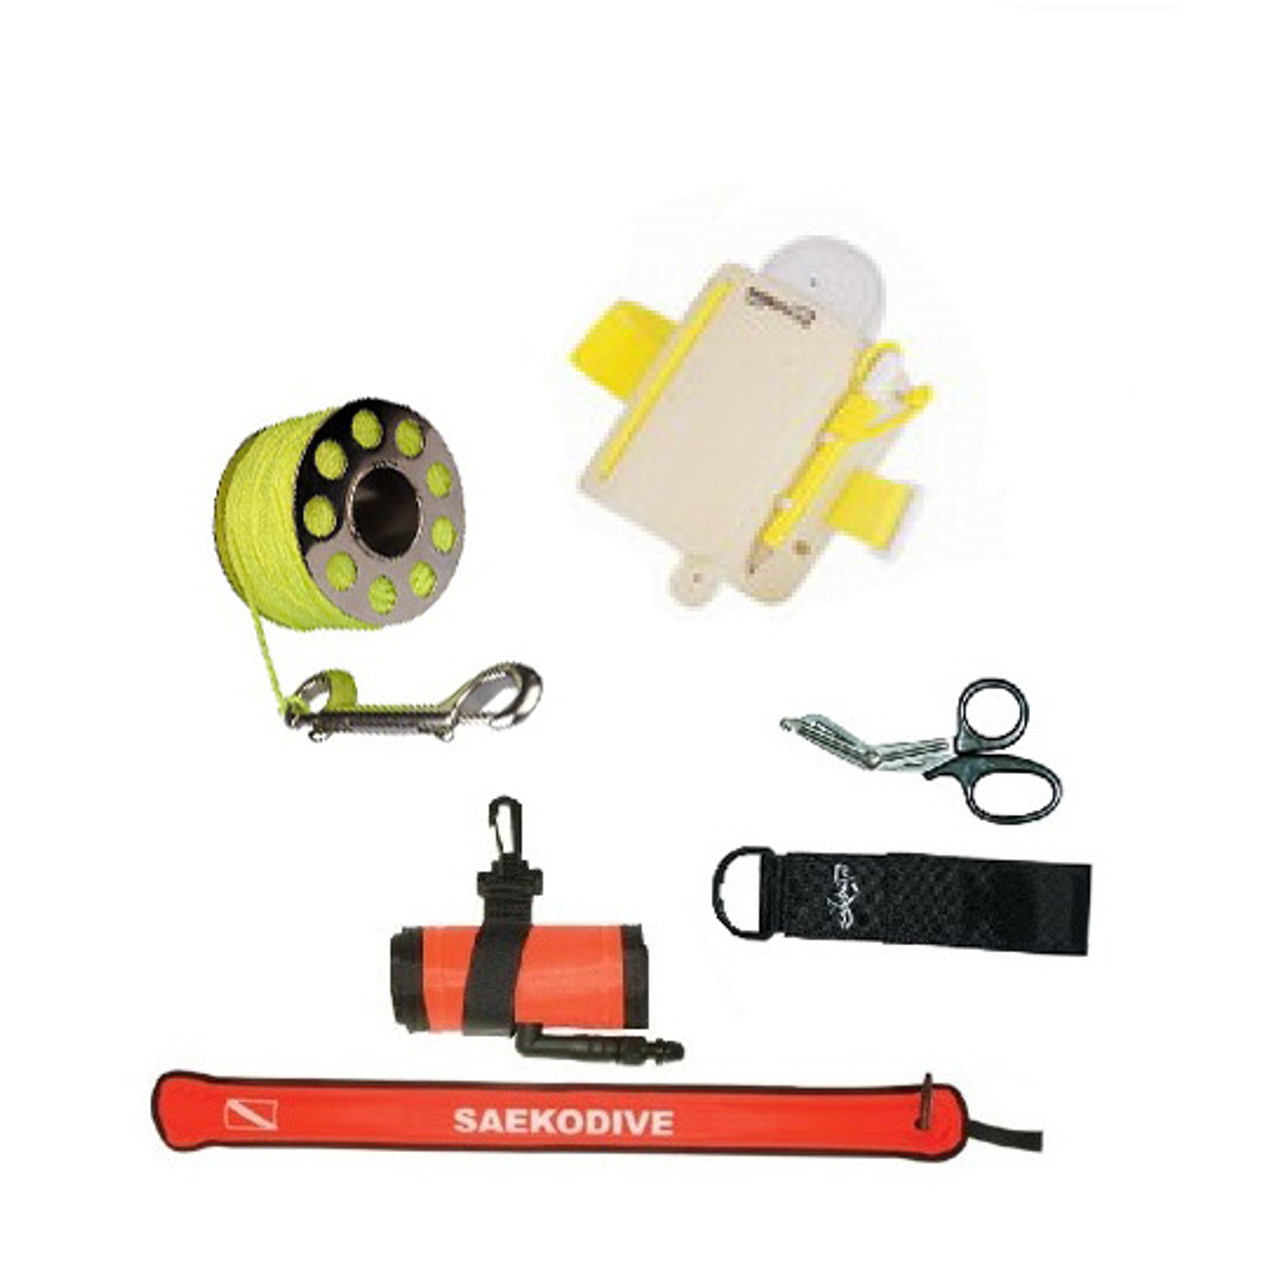 Ultimate Spearfishing Package - Dive Store Auckland, Scuba Dive Gear  Testing